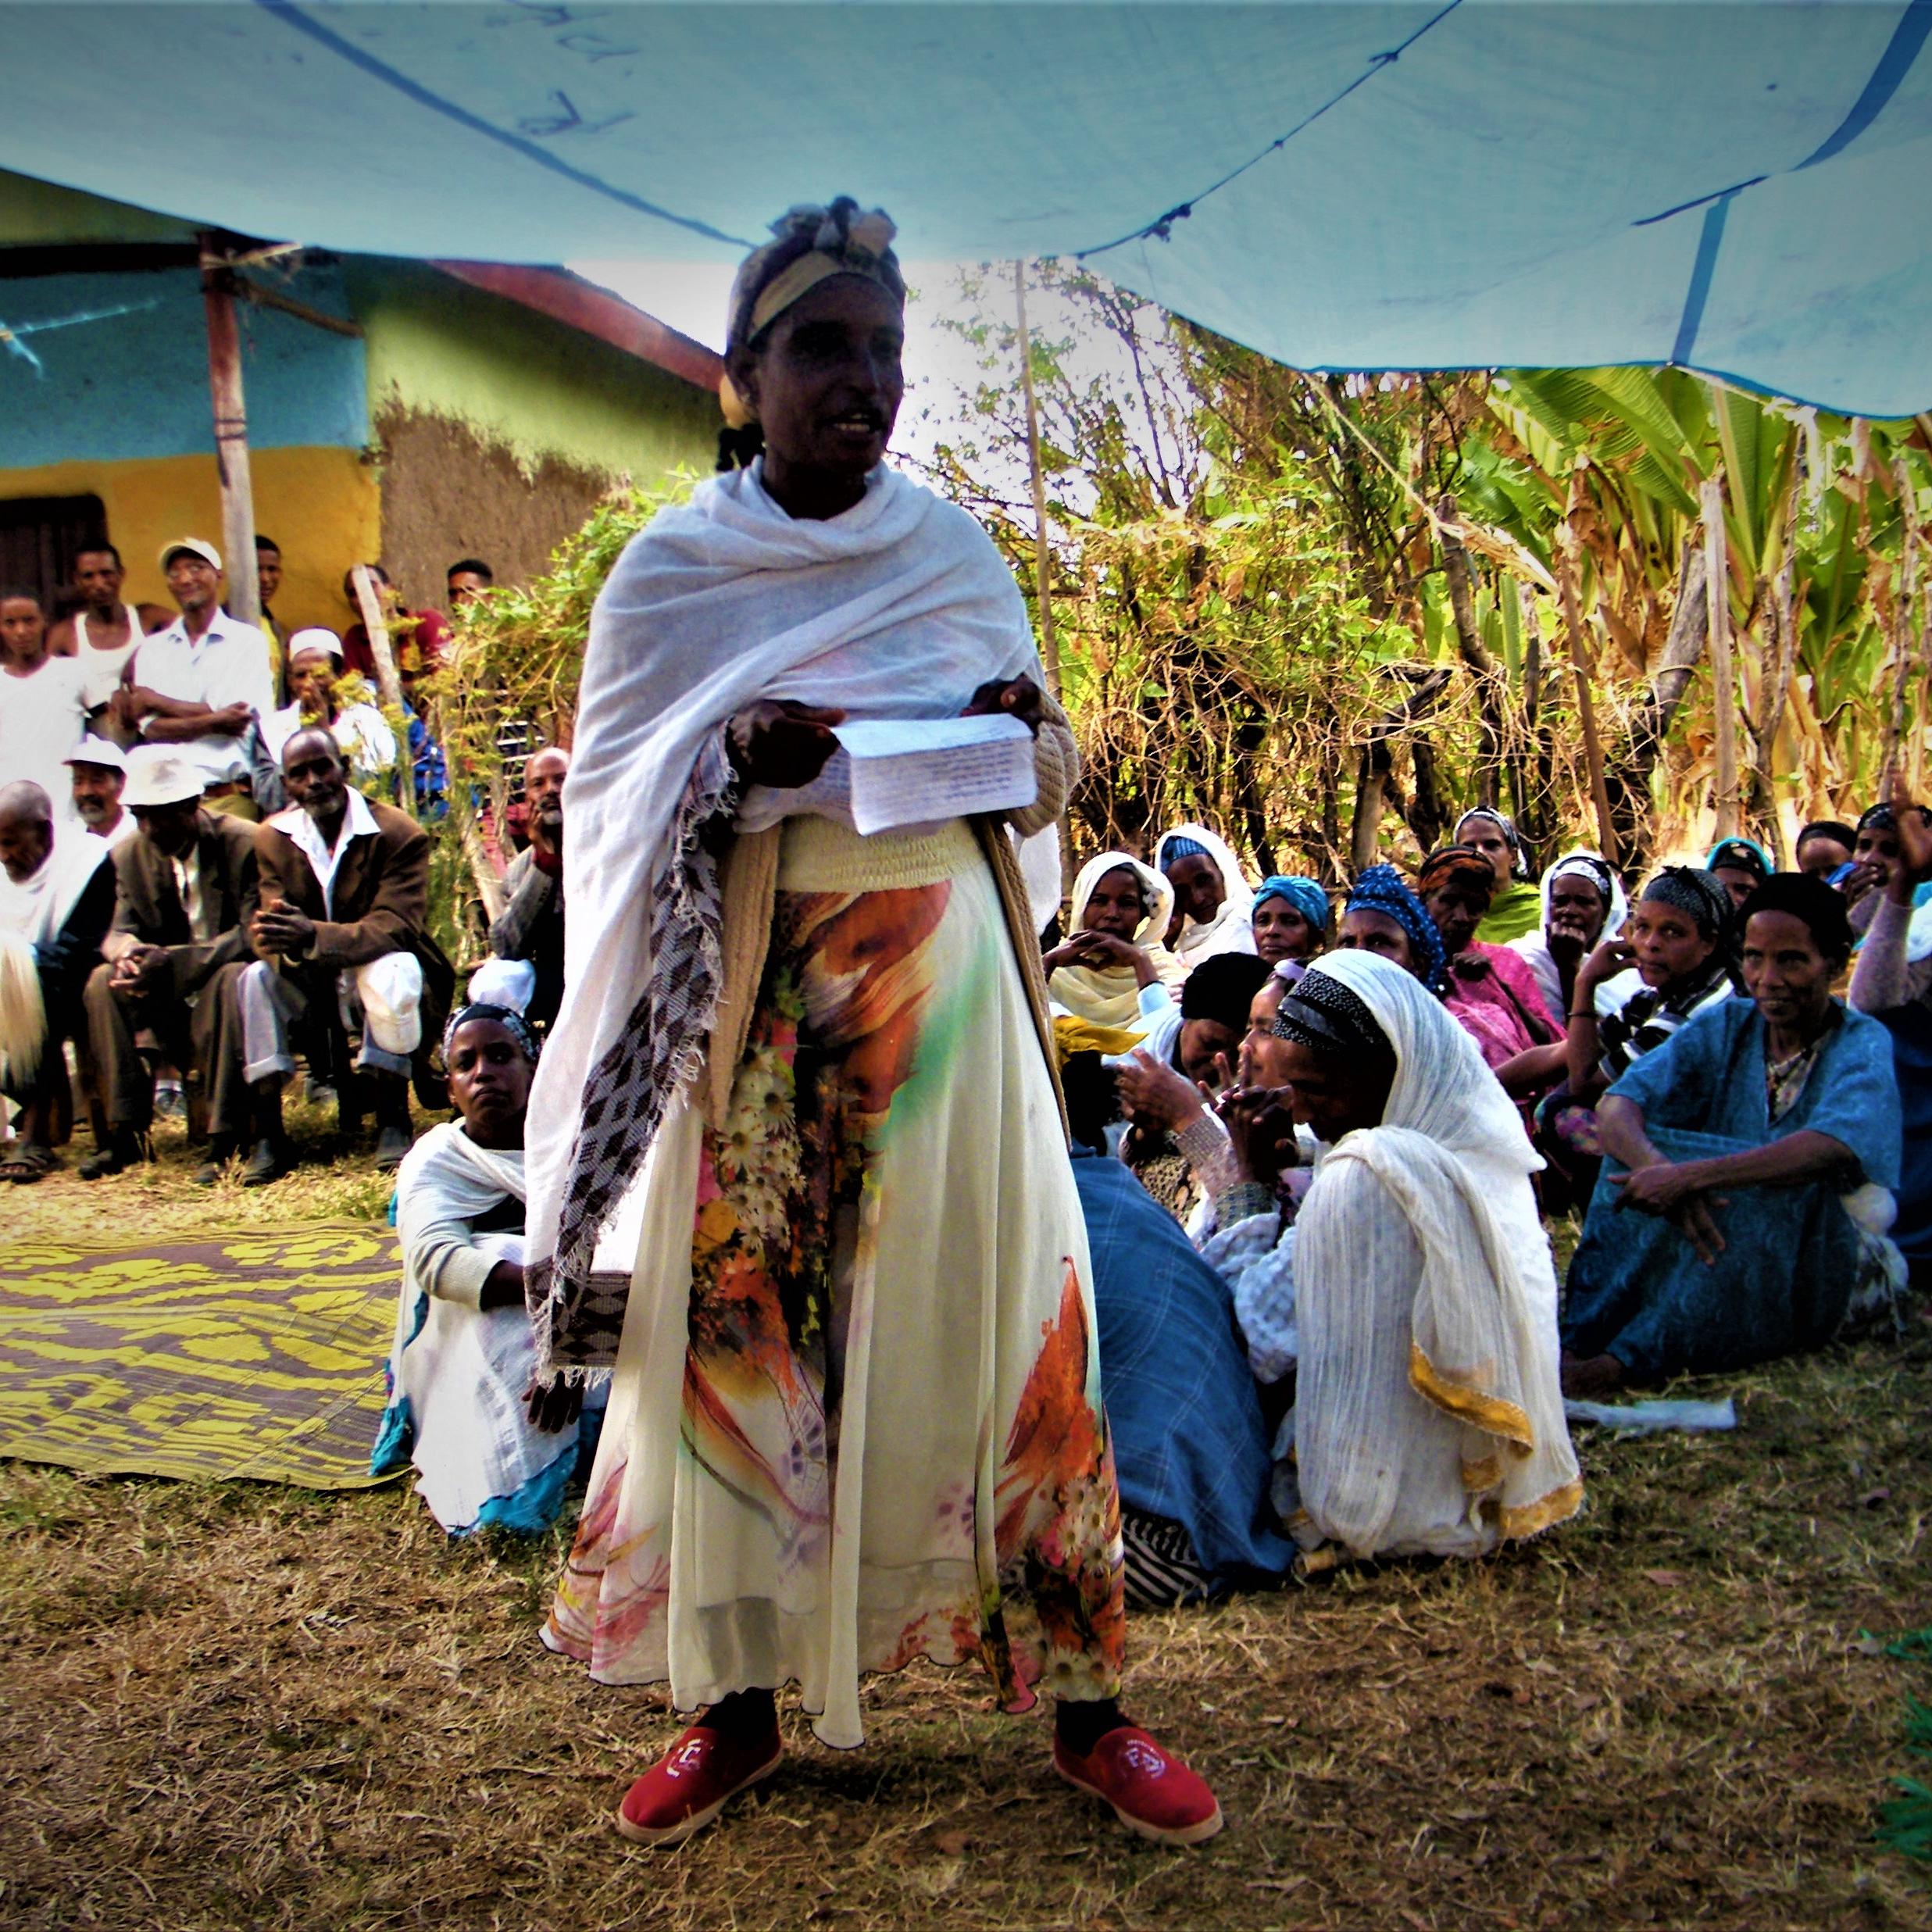 Woman gives a speech to village members, Ethiopia